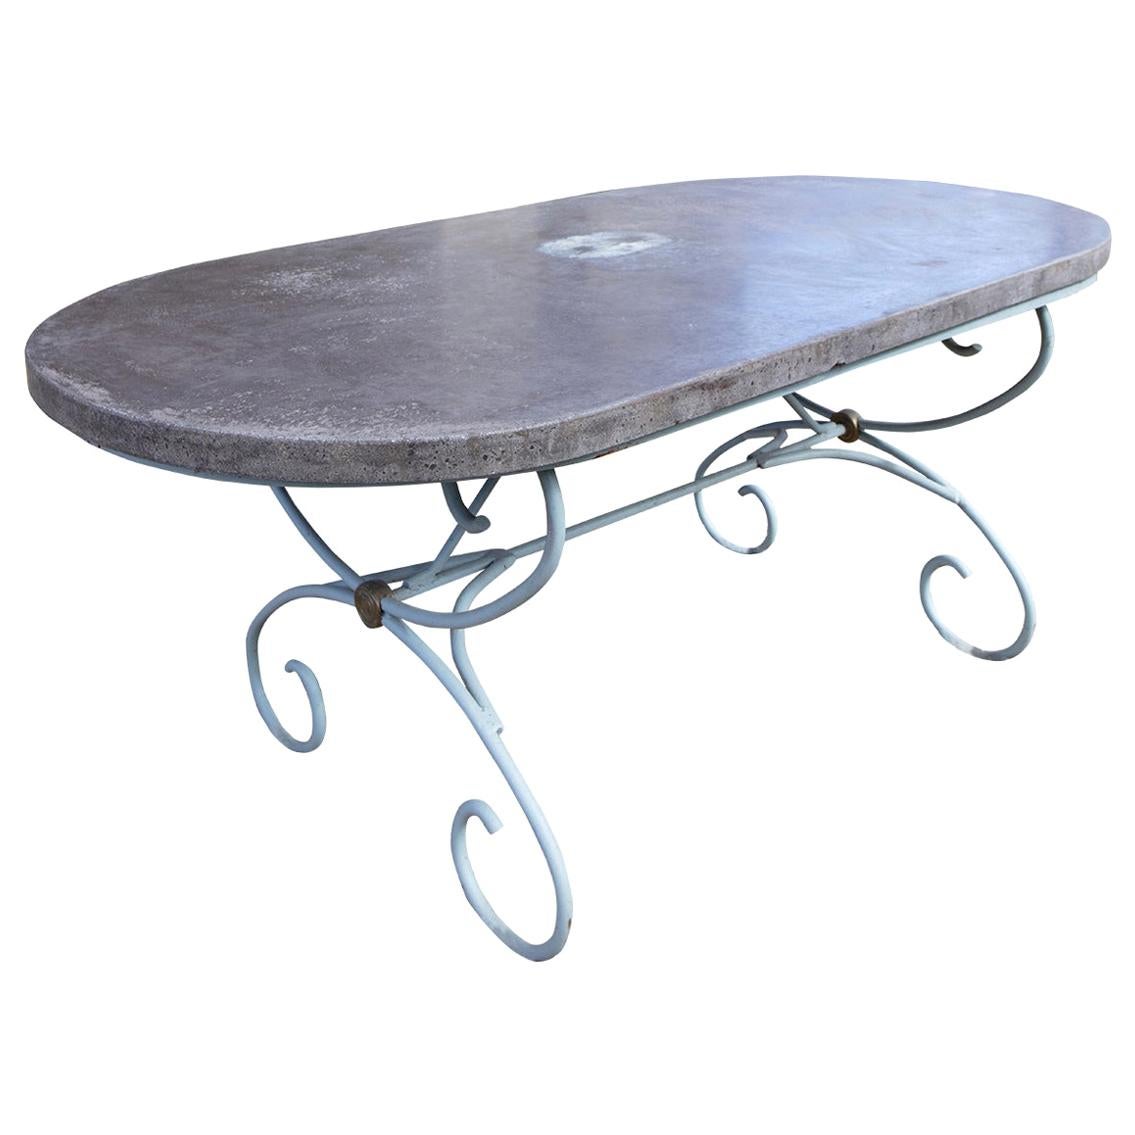 French 19th Century Painted Iron Table Base with Concrete Top